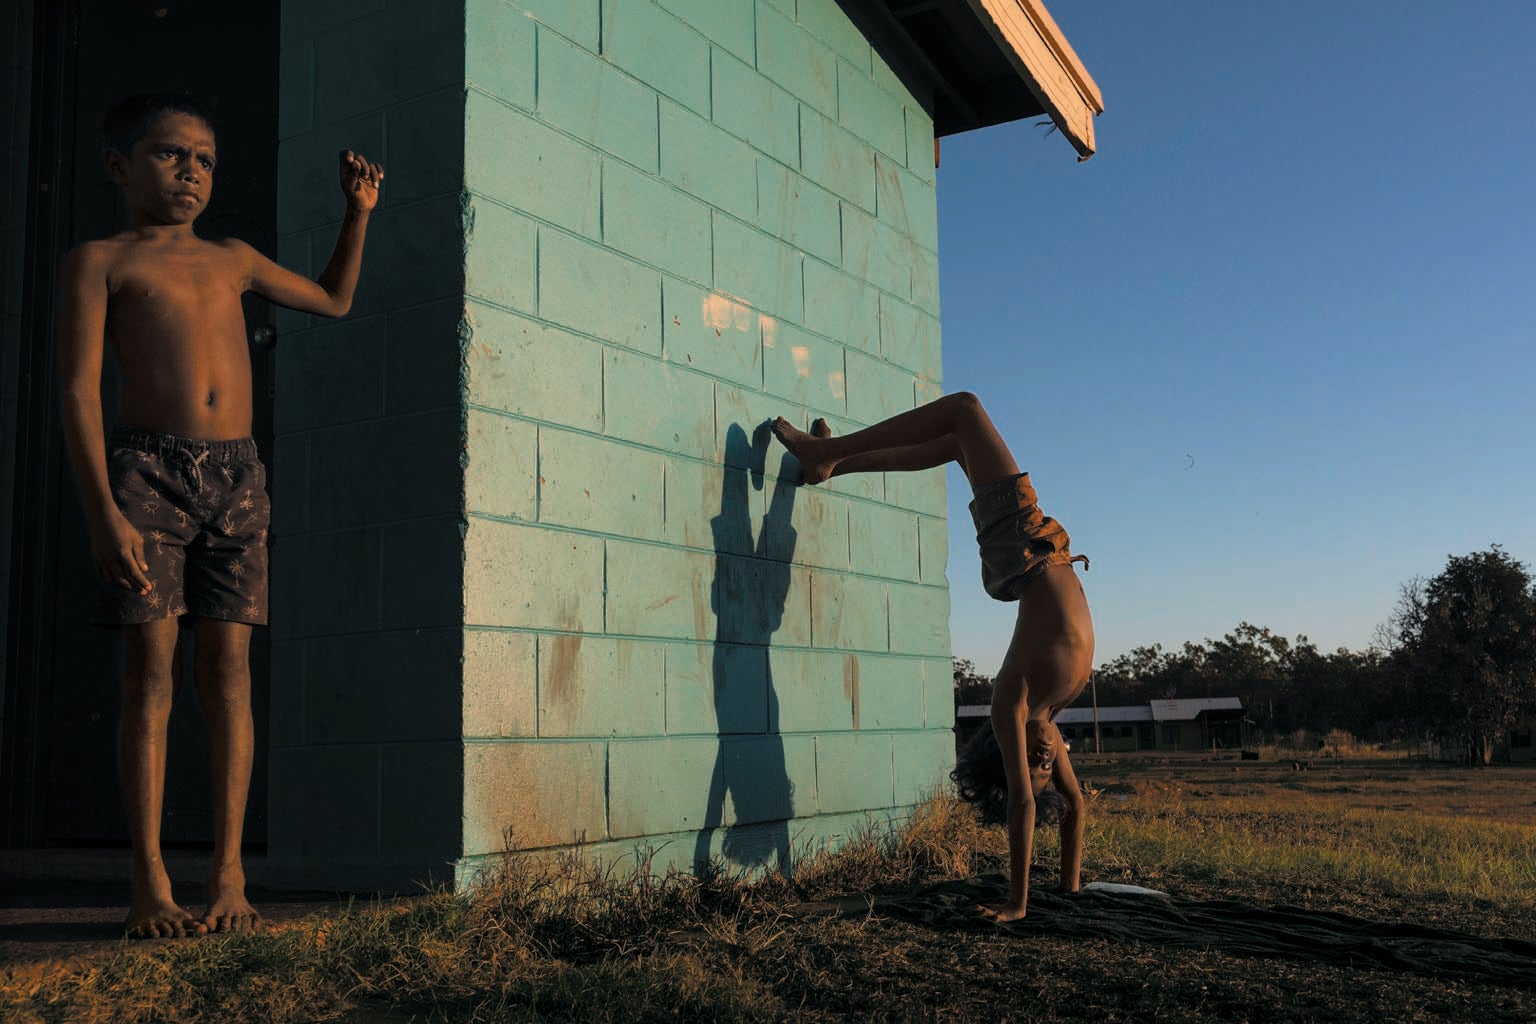 Two children playing outside a building. One child is doing a handstand against the building.